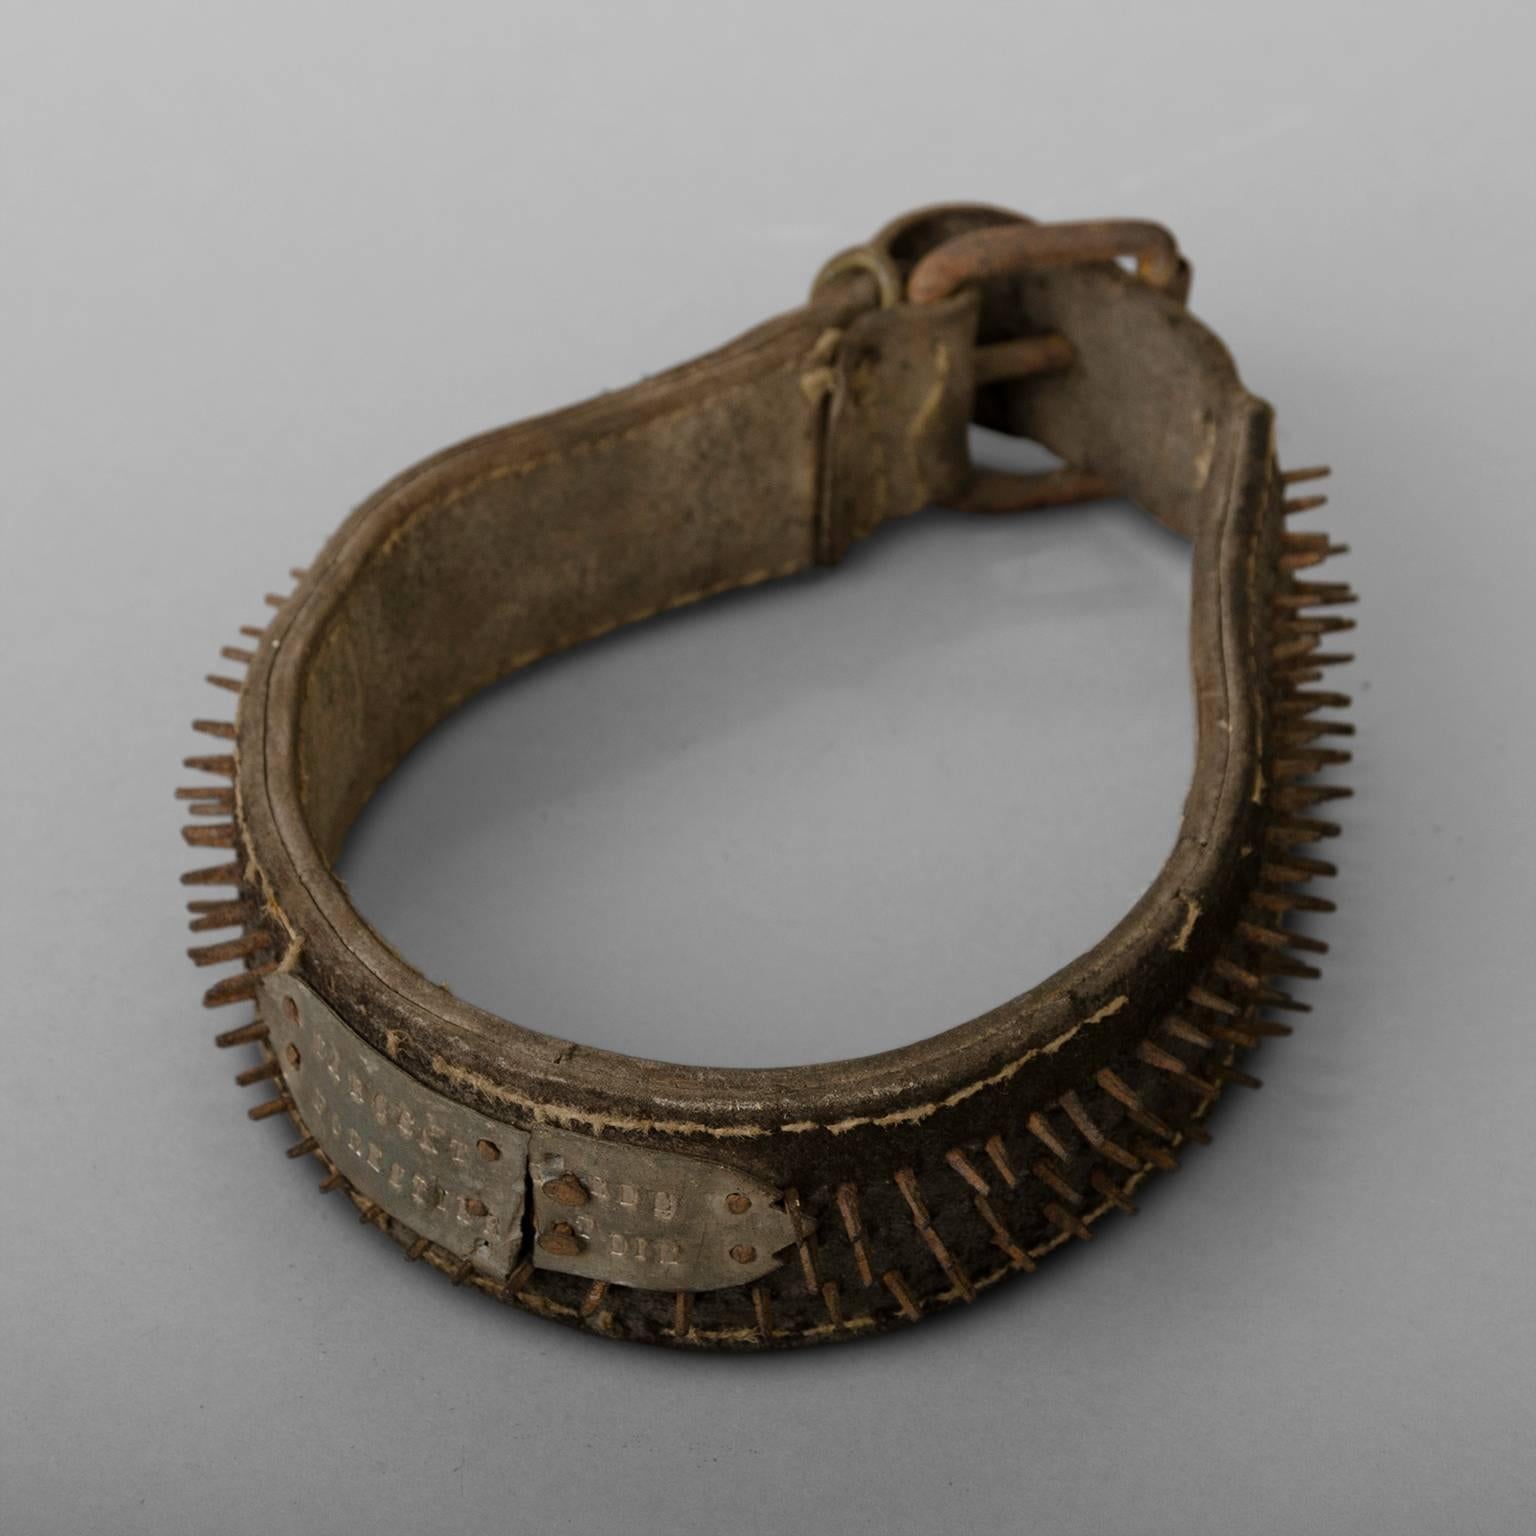 Leather sheepdog collar, with many small spikes in forged iron. Presence of a engraved plate with the owner's contact information.